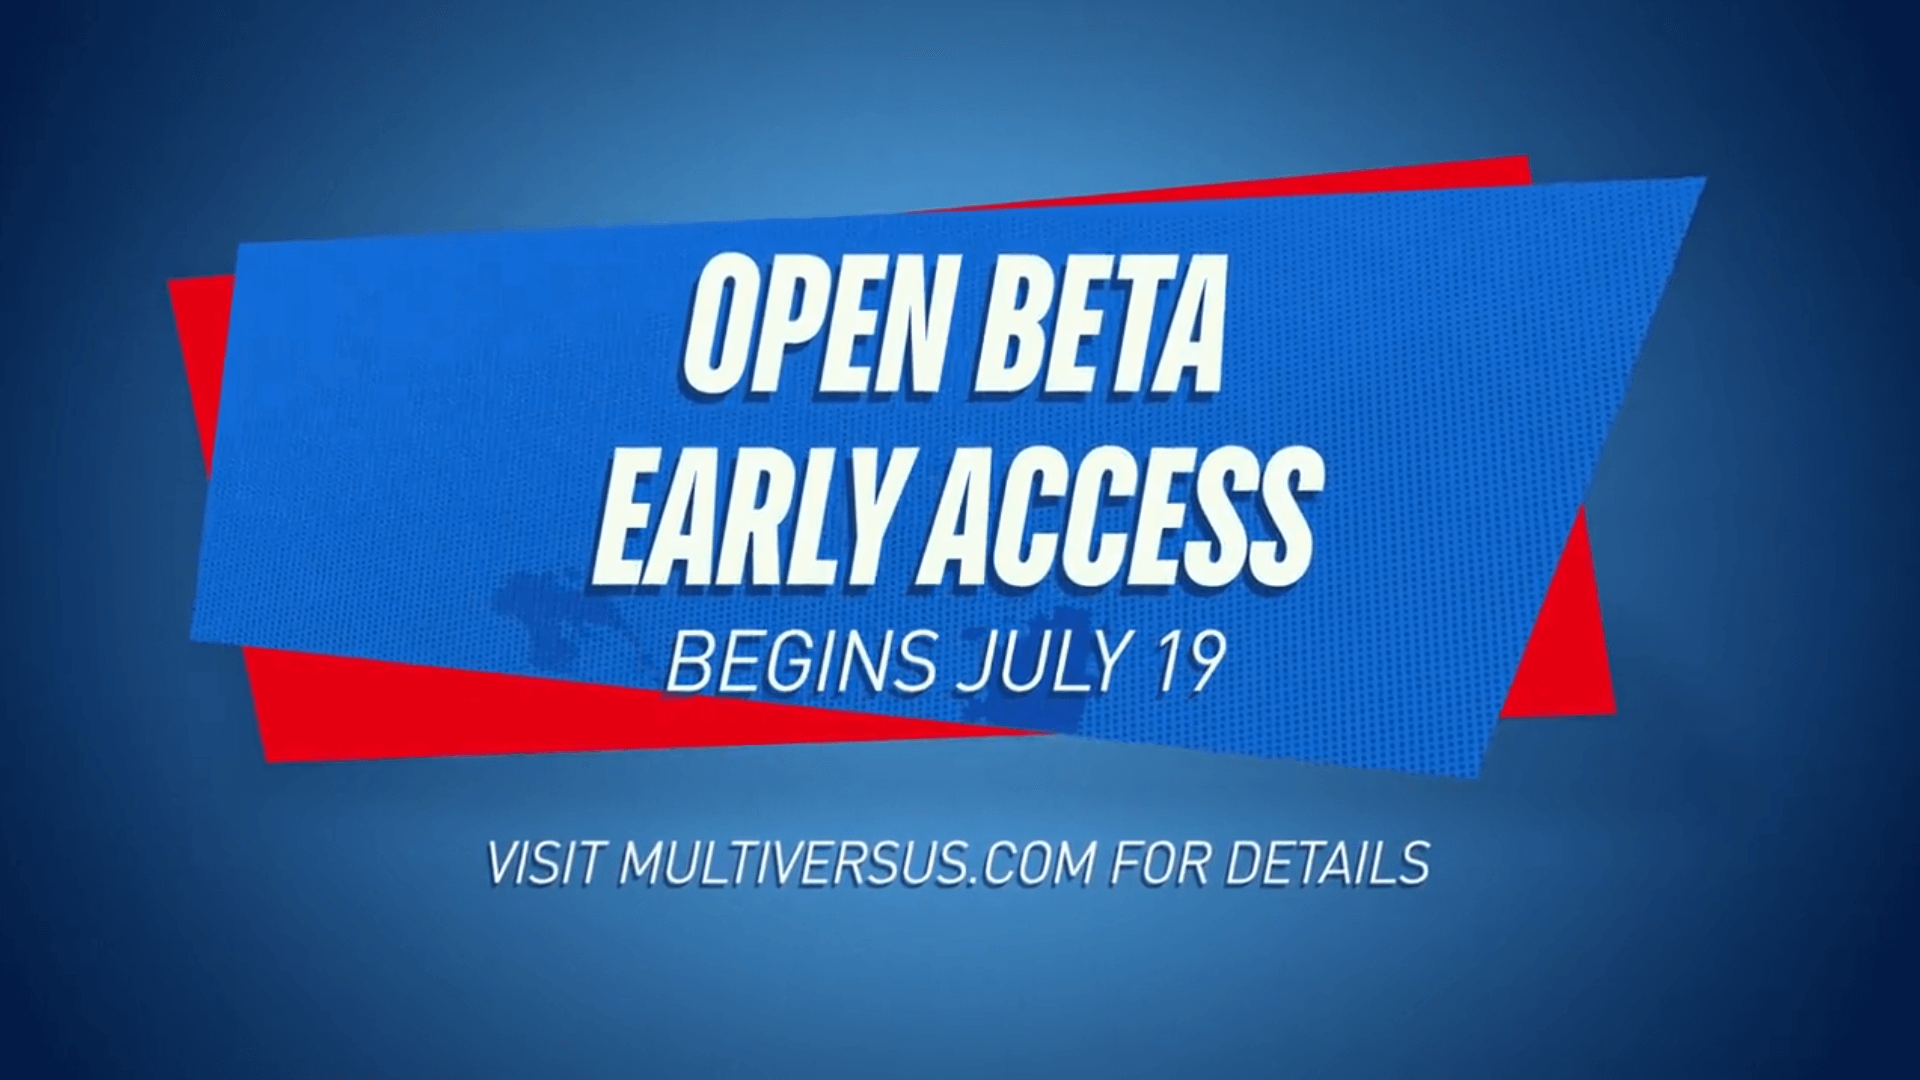 Multiversus open beta on July 26th with early access on the 19th